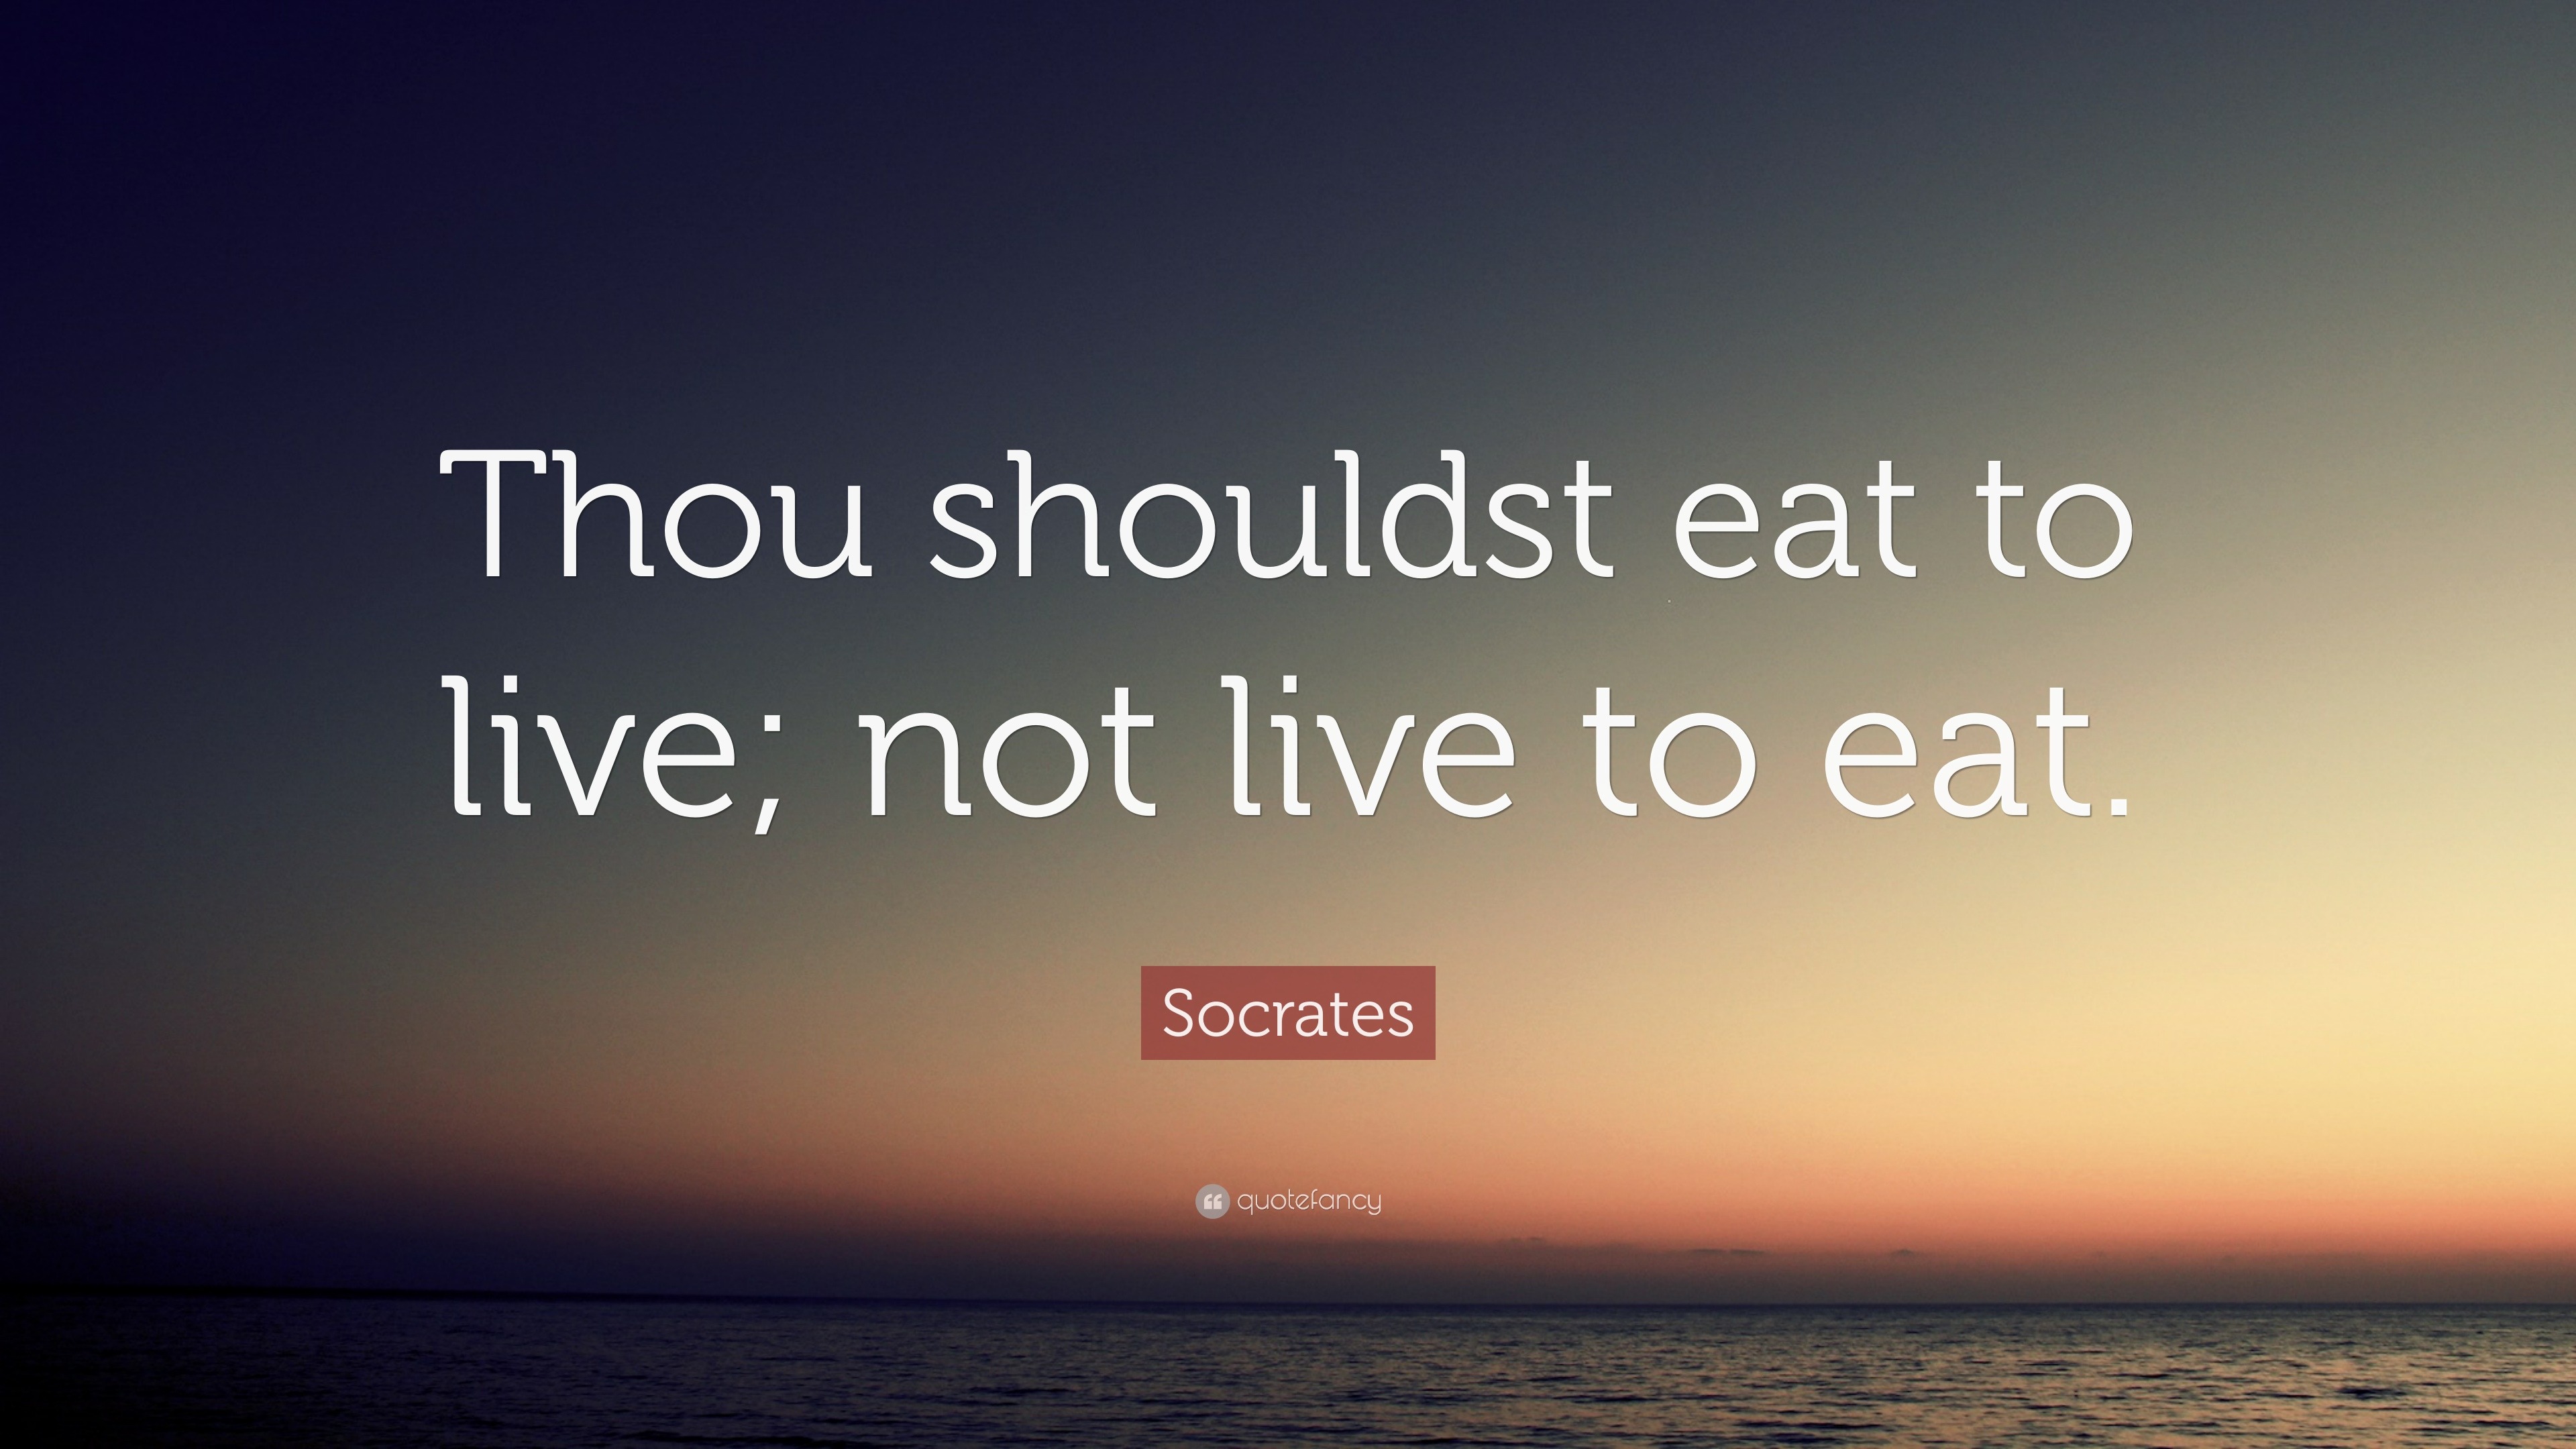 Eat To Live Not Live To Eat Quote Socrates Thou Shouldst Eat To Live Not Live To Eat Quotetab